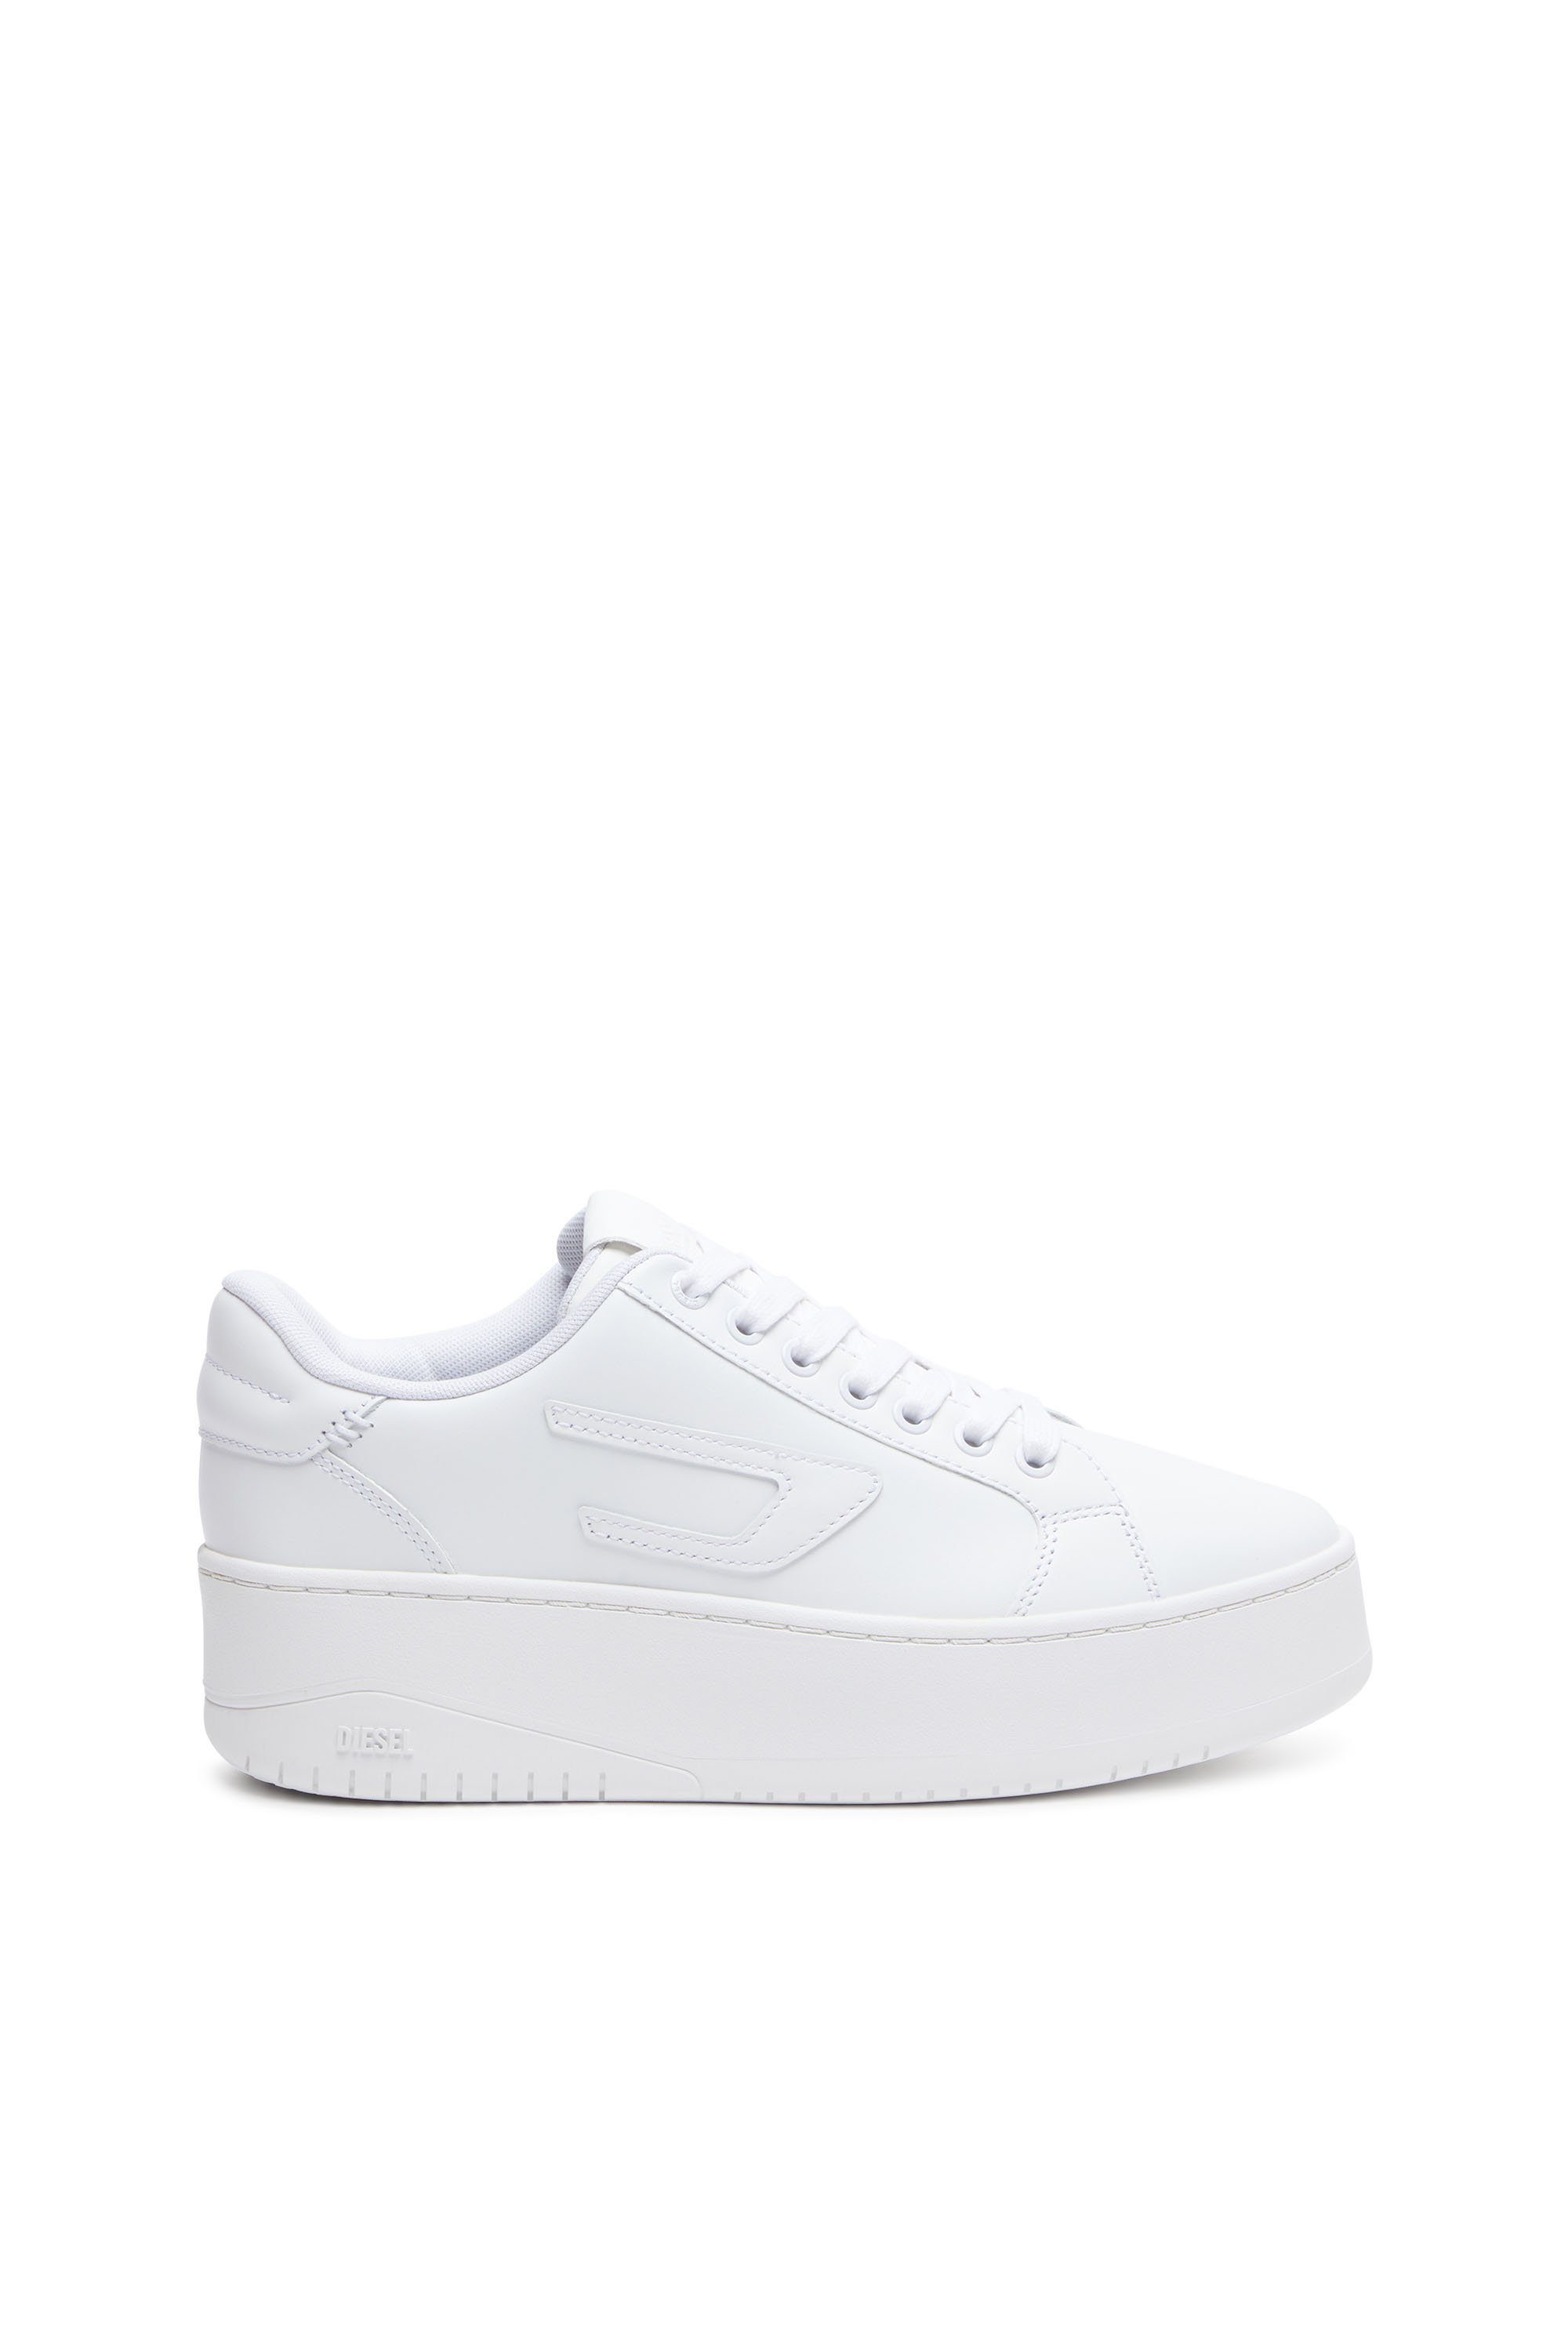 Diesel - S-Athene Bold-Flatform sneakers in leather - Sneakers - Woman - White